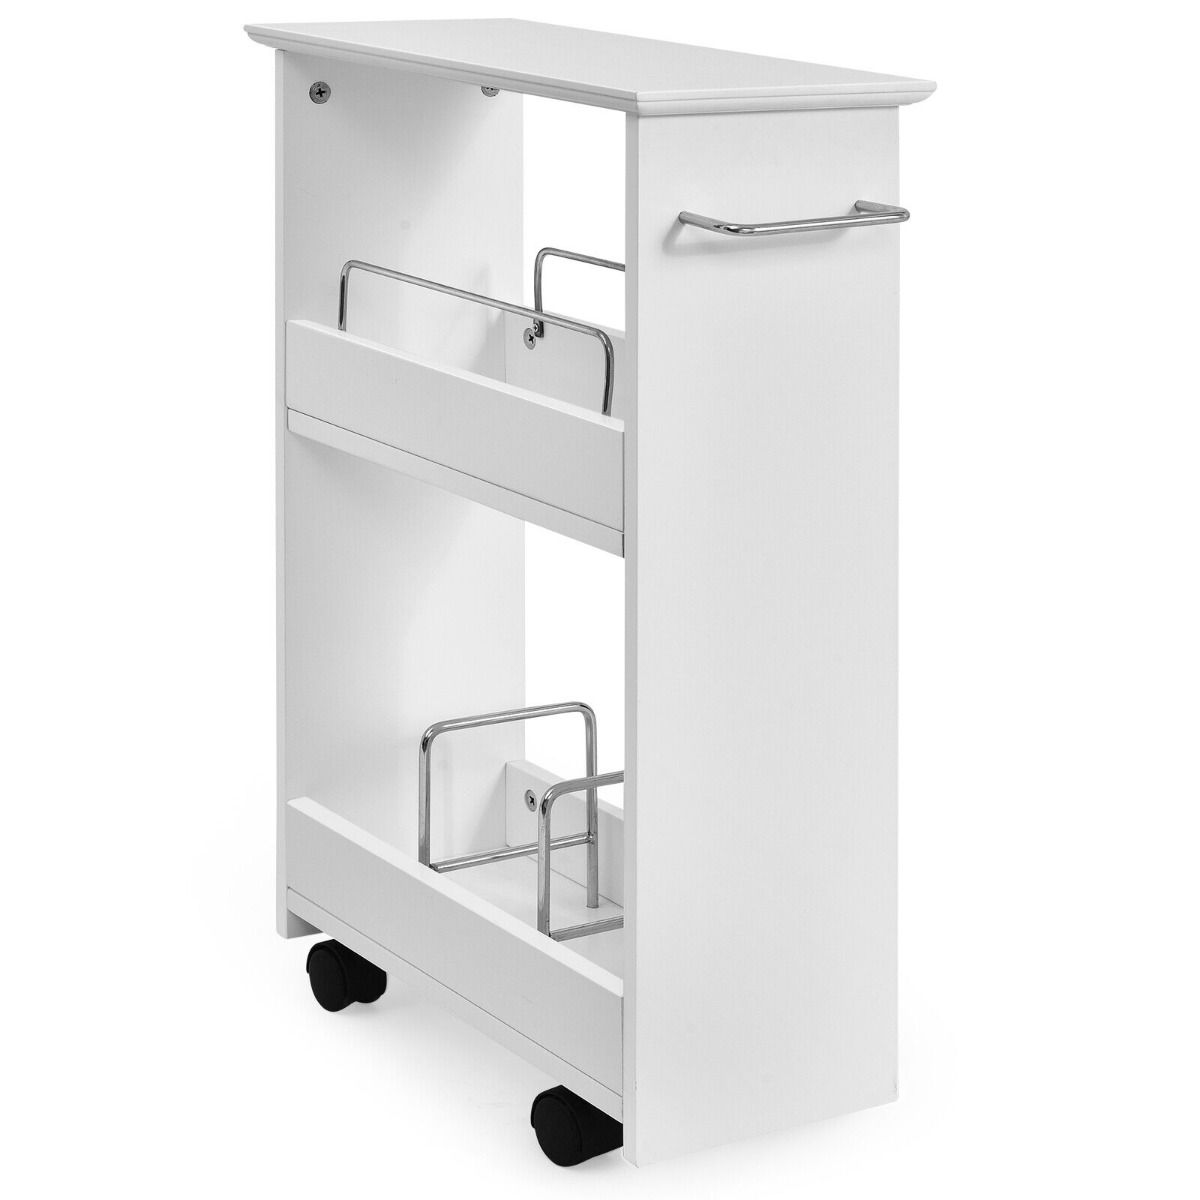 2-Tier Slim Rolling Storage Cart with Metal Dividers and Towel Bar